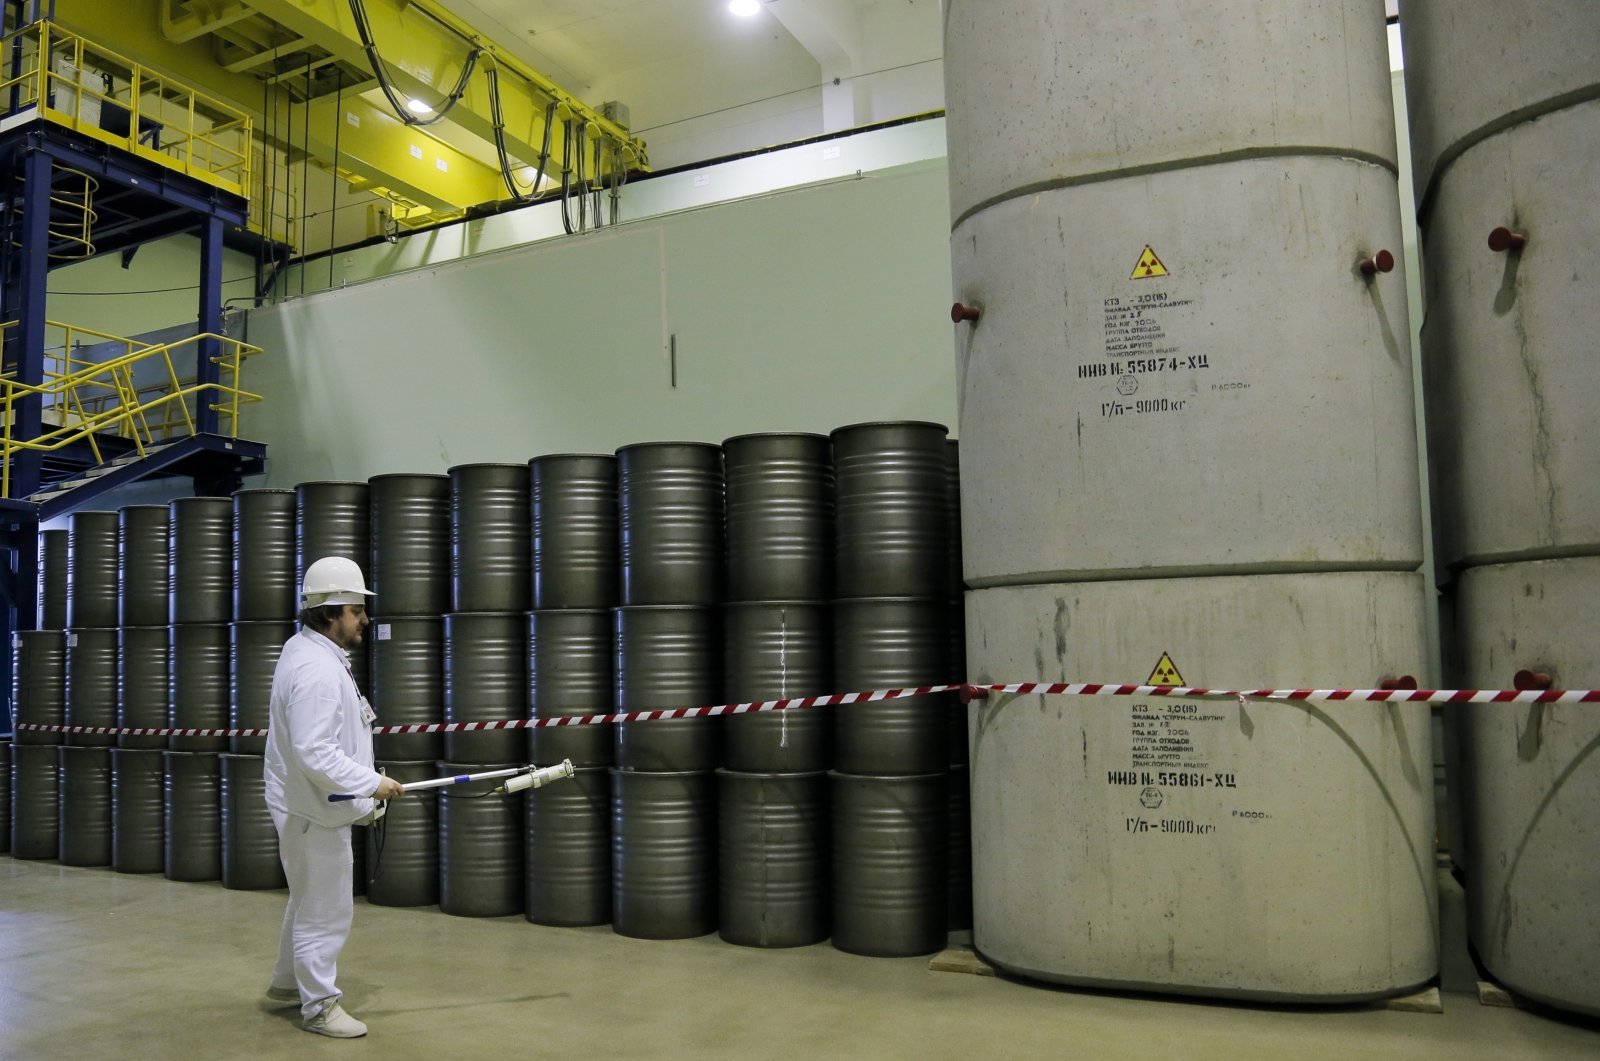 A worker checks the radiation level of barrels of nuclear waste from the Chernobyl nuclear power plant in Chernobyl, Ukraine, March 23, 2016. (AP Photo)